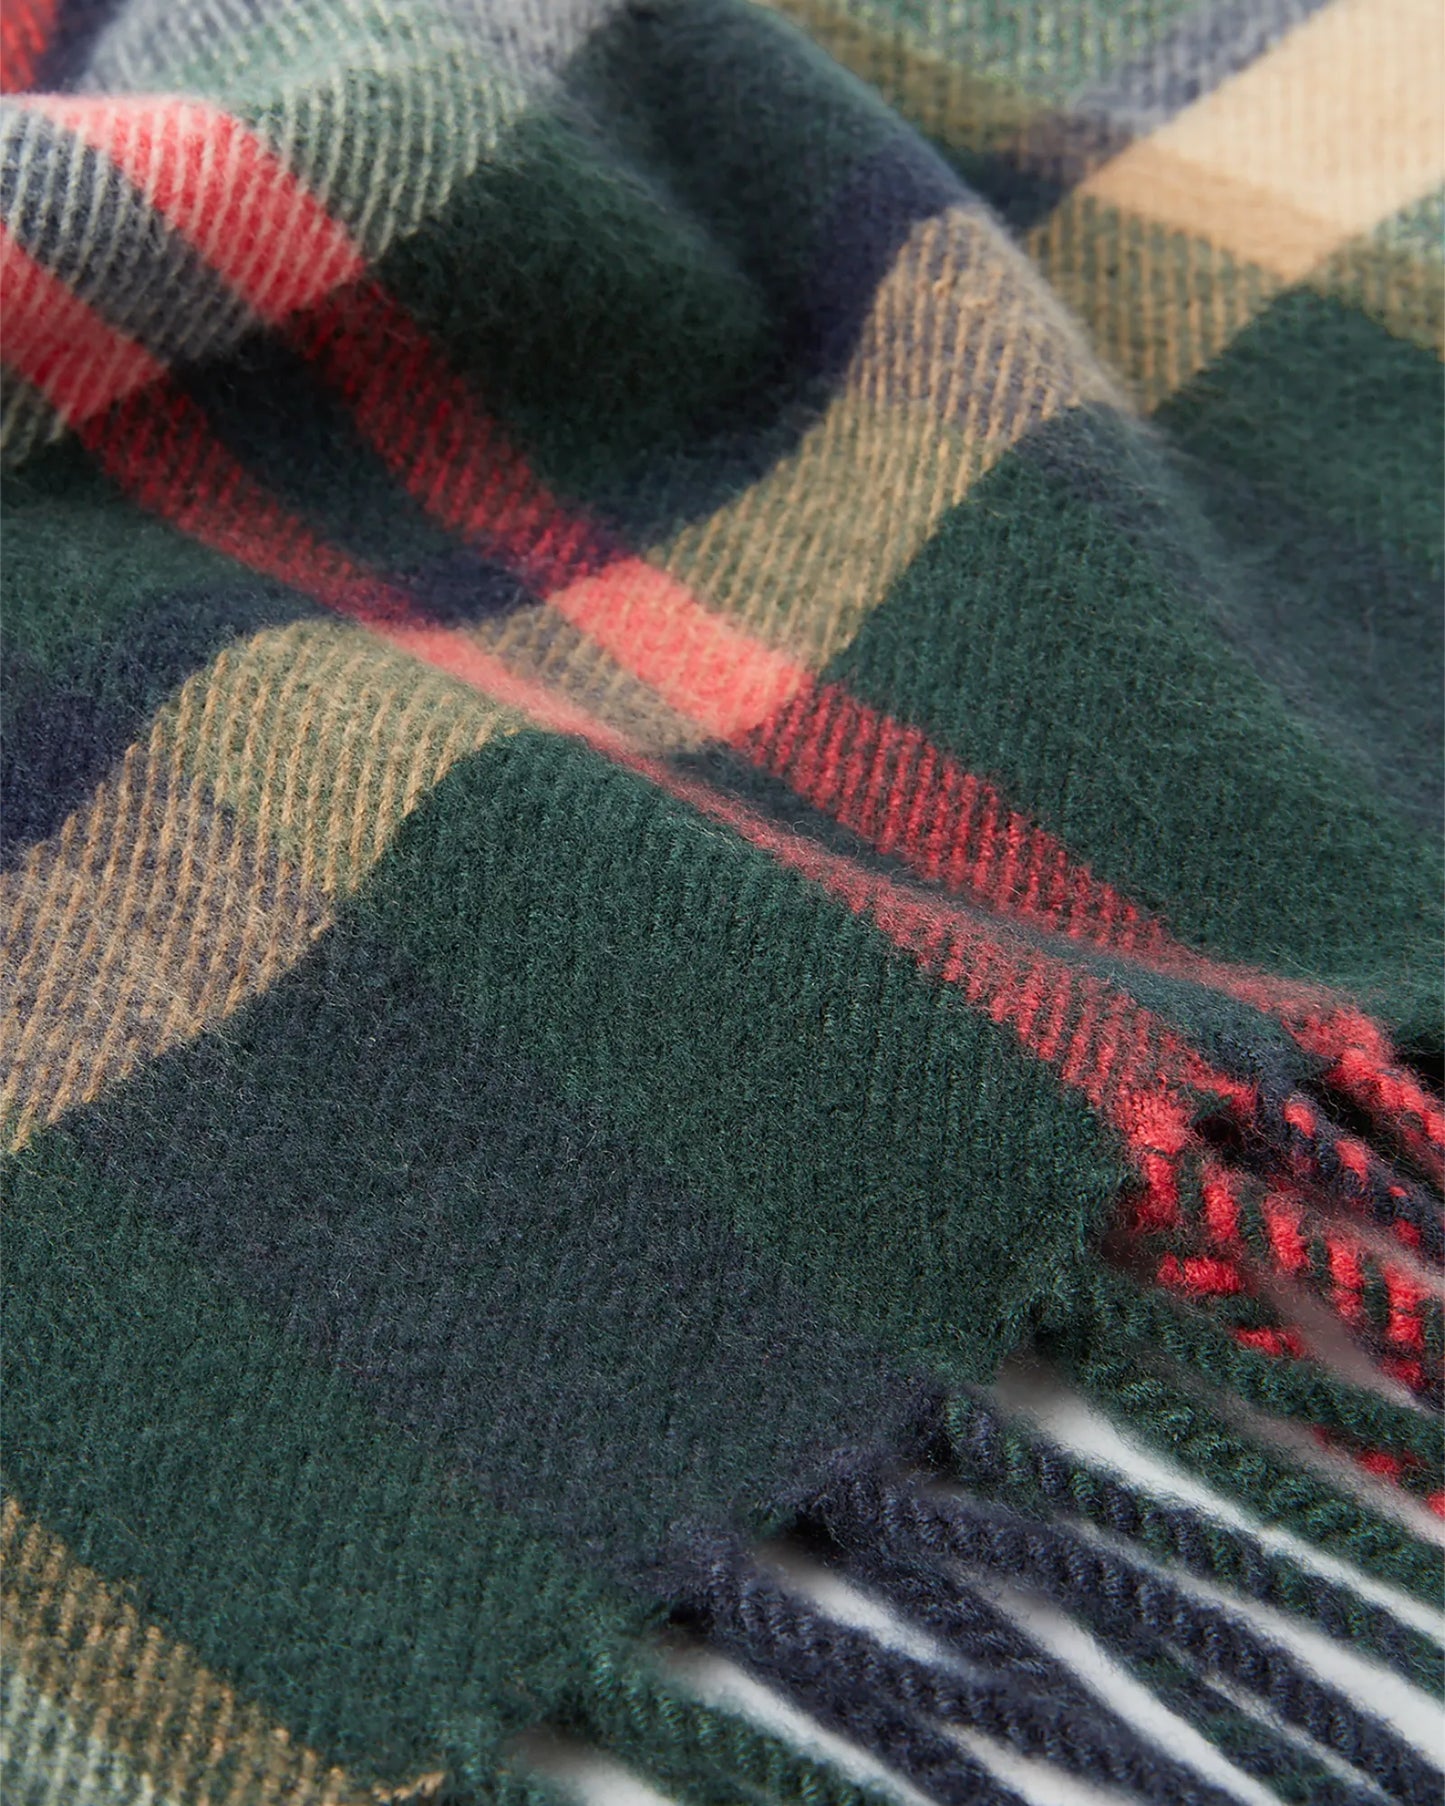 Langtree Scarf - Green Check